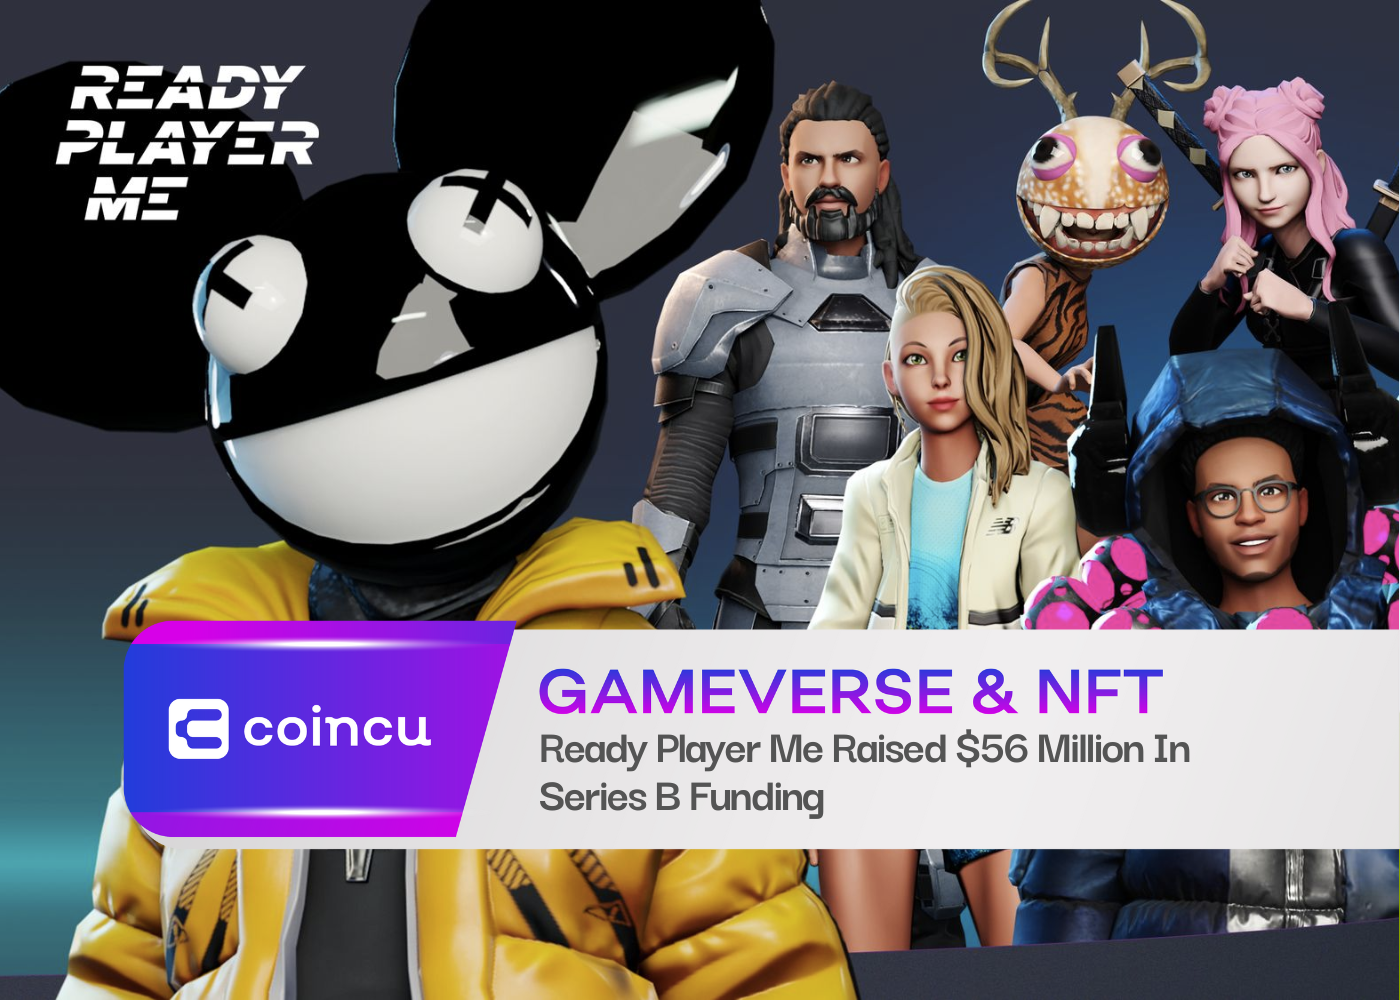 Ready Player Me Raised $56 Million In Series B Funding